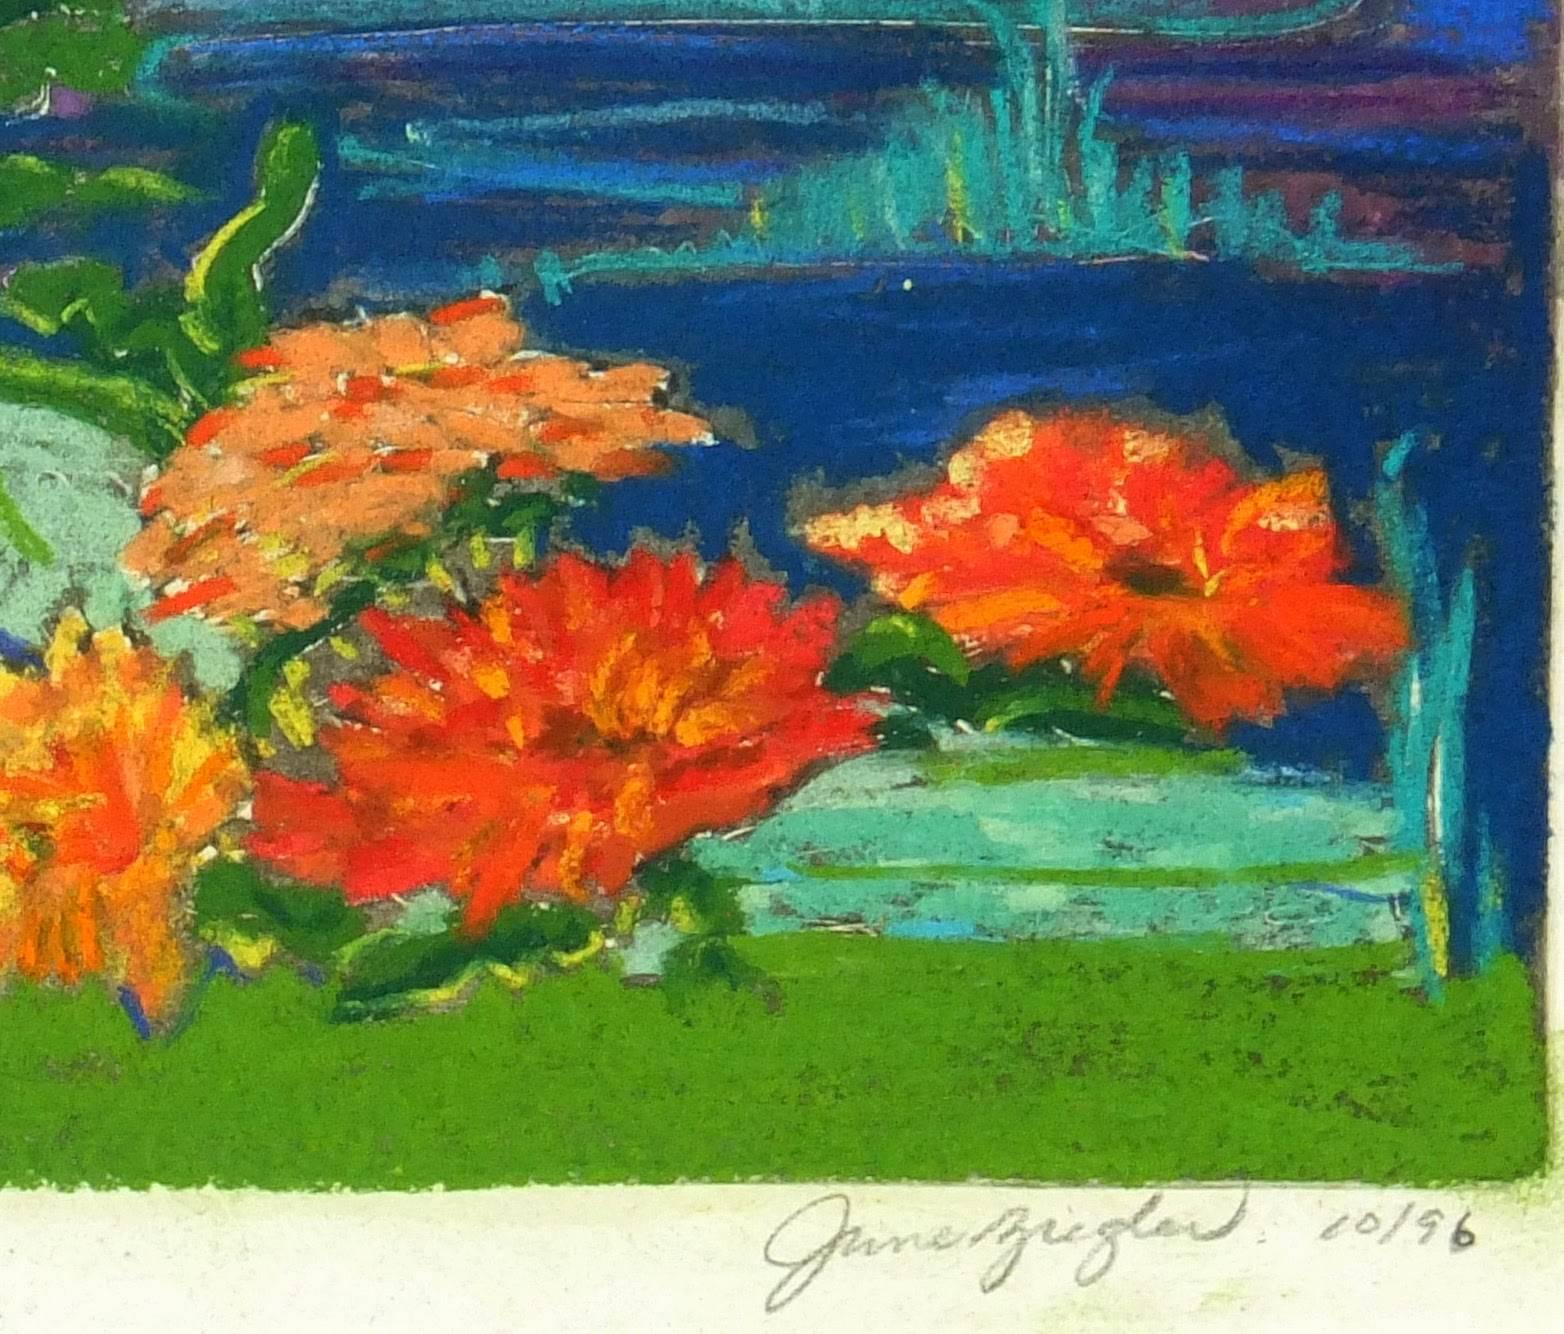 Pastel with dazzling colors (Orange and red flowers, hues of greens and different shades of blue in the background) of fiery flowers blooming by the water. Signed 